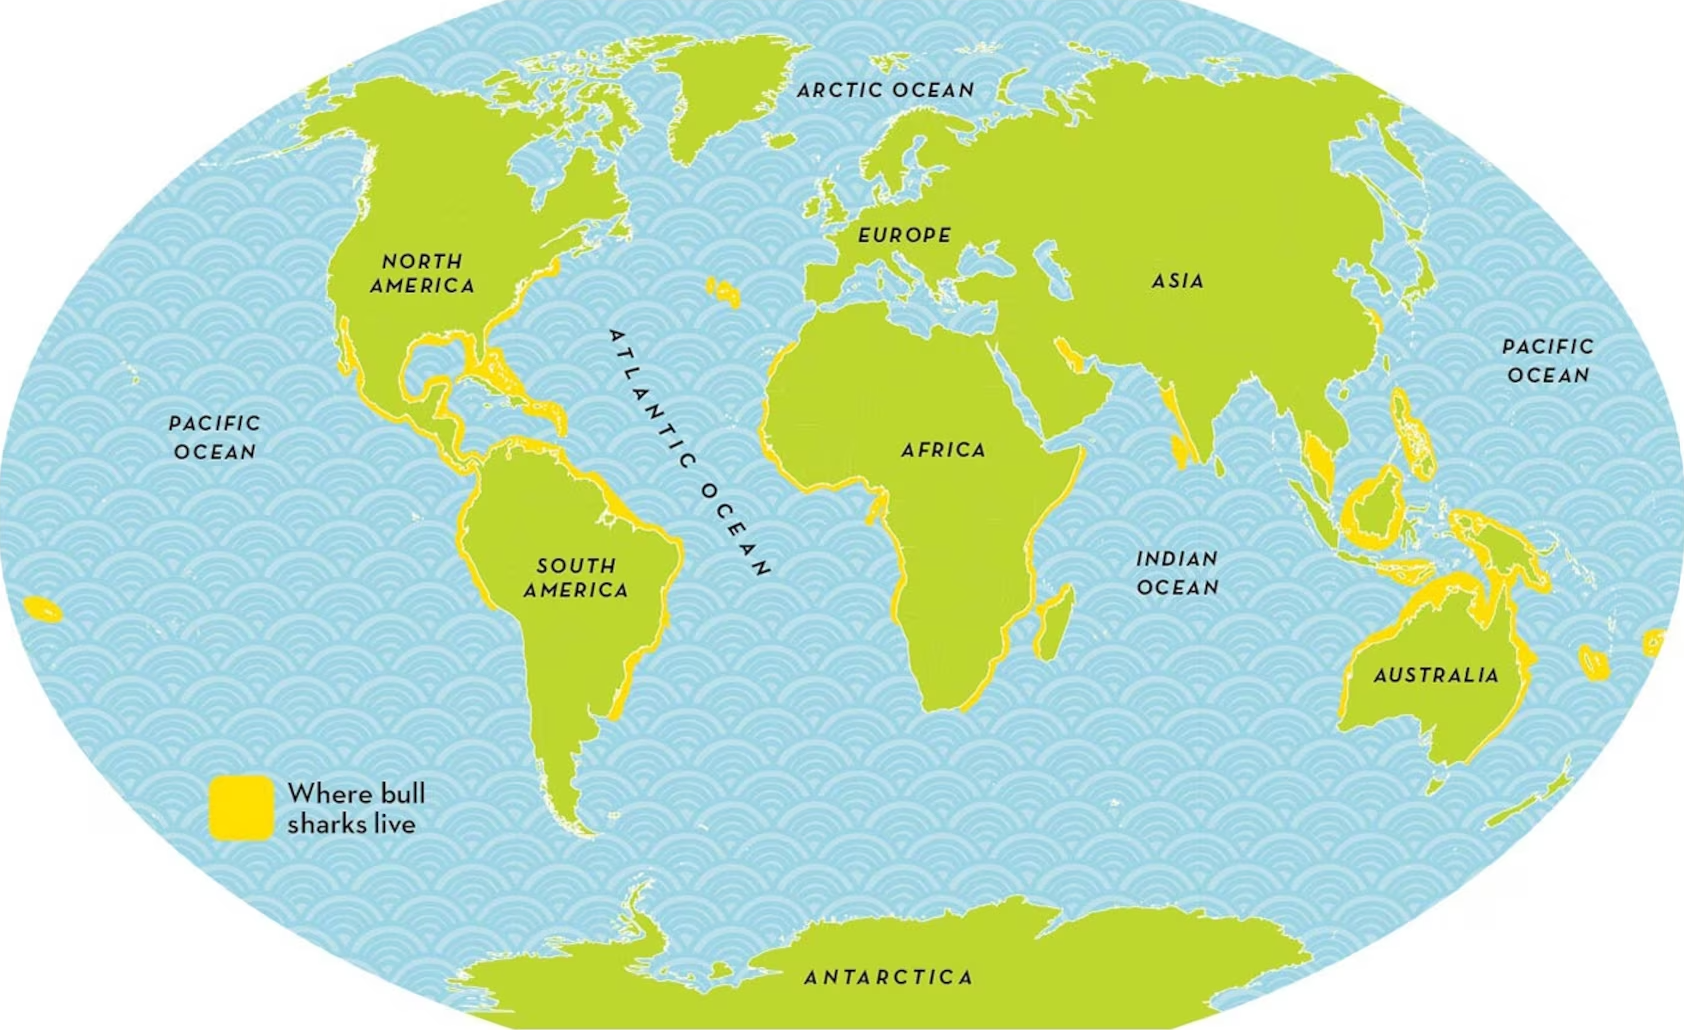 Map National Geographics showing whre bull sharks live throughout the world.